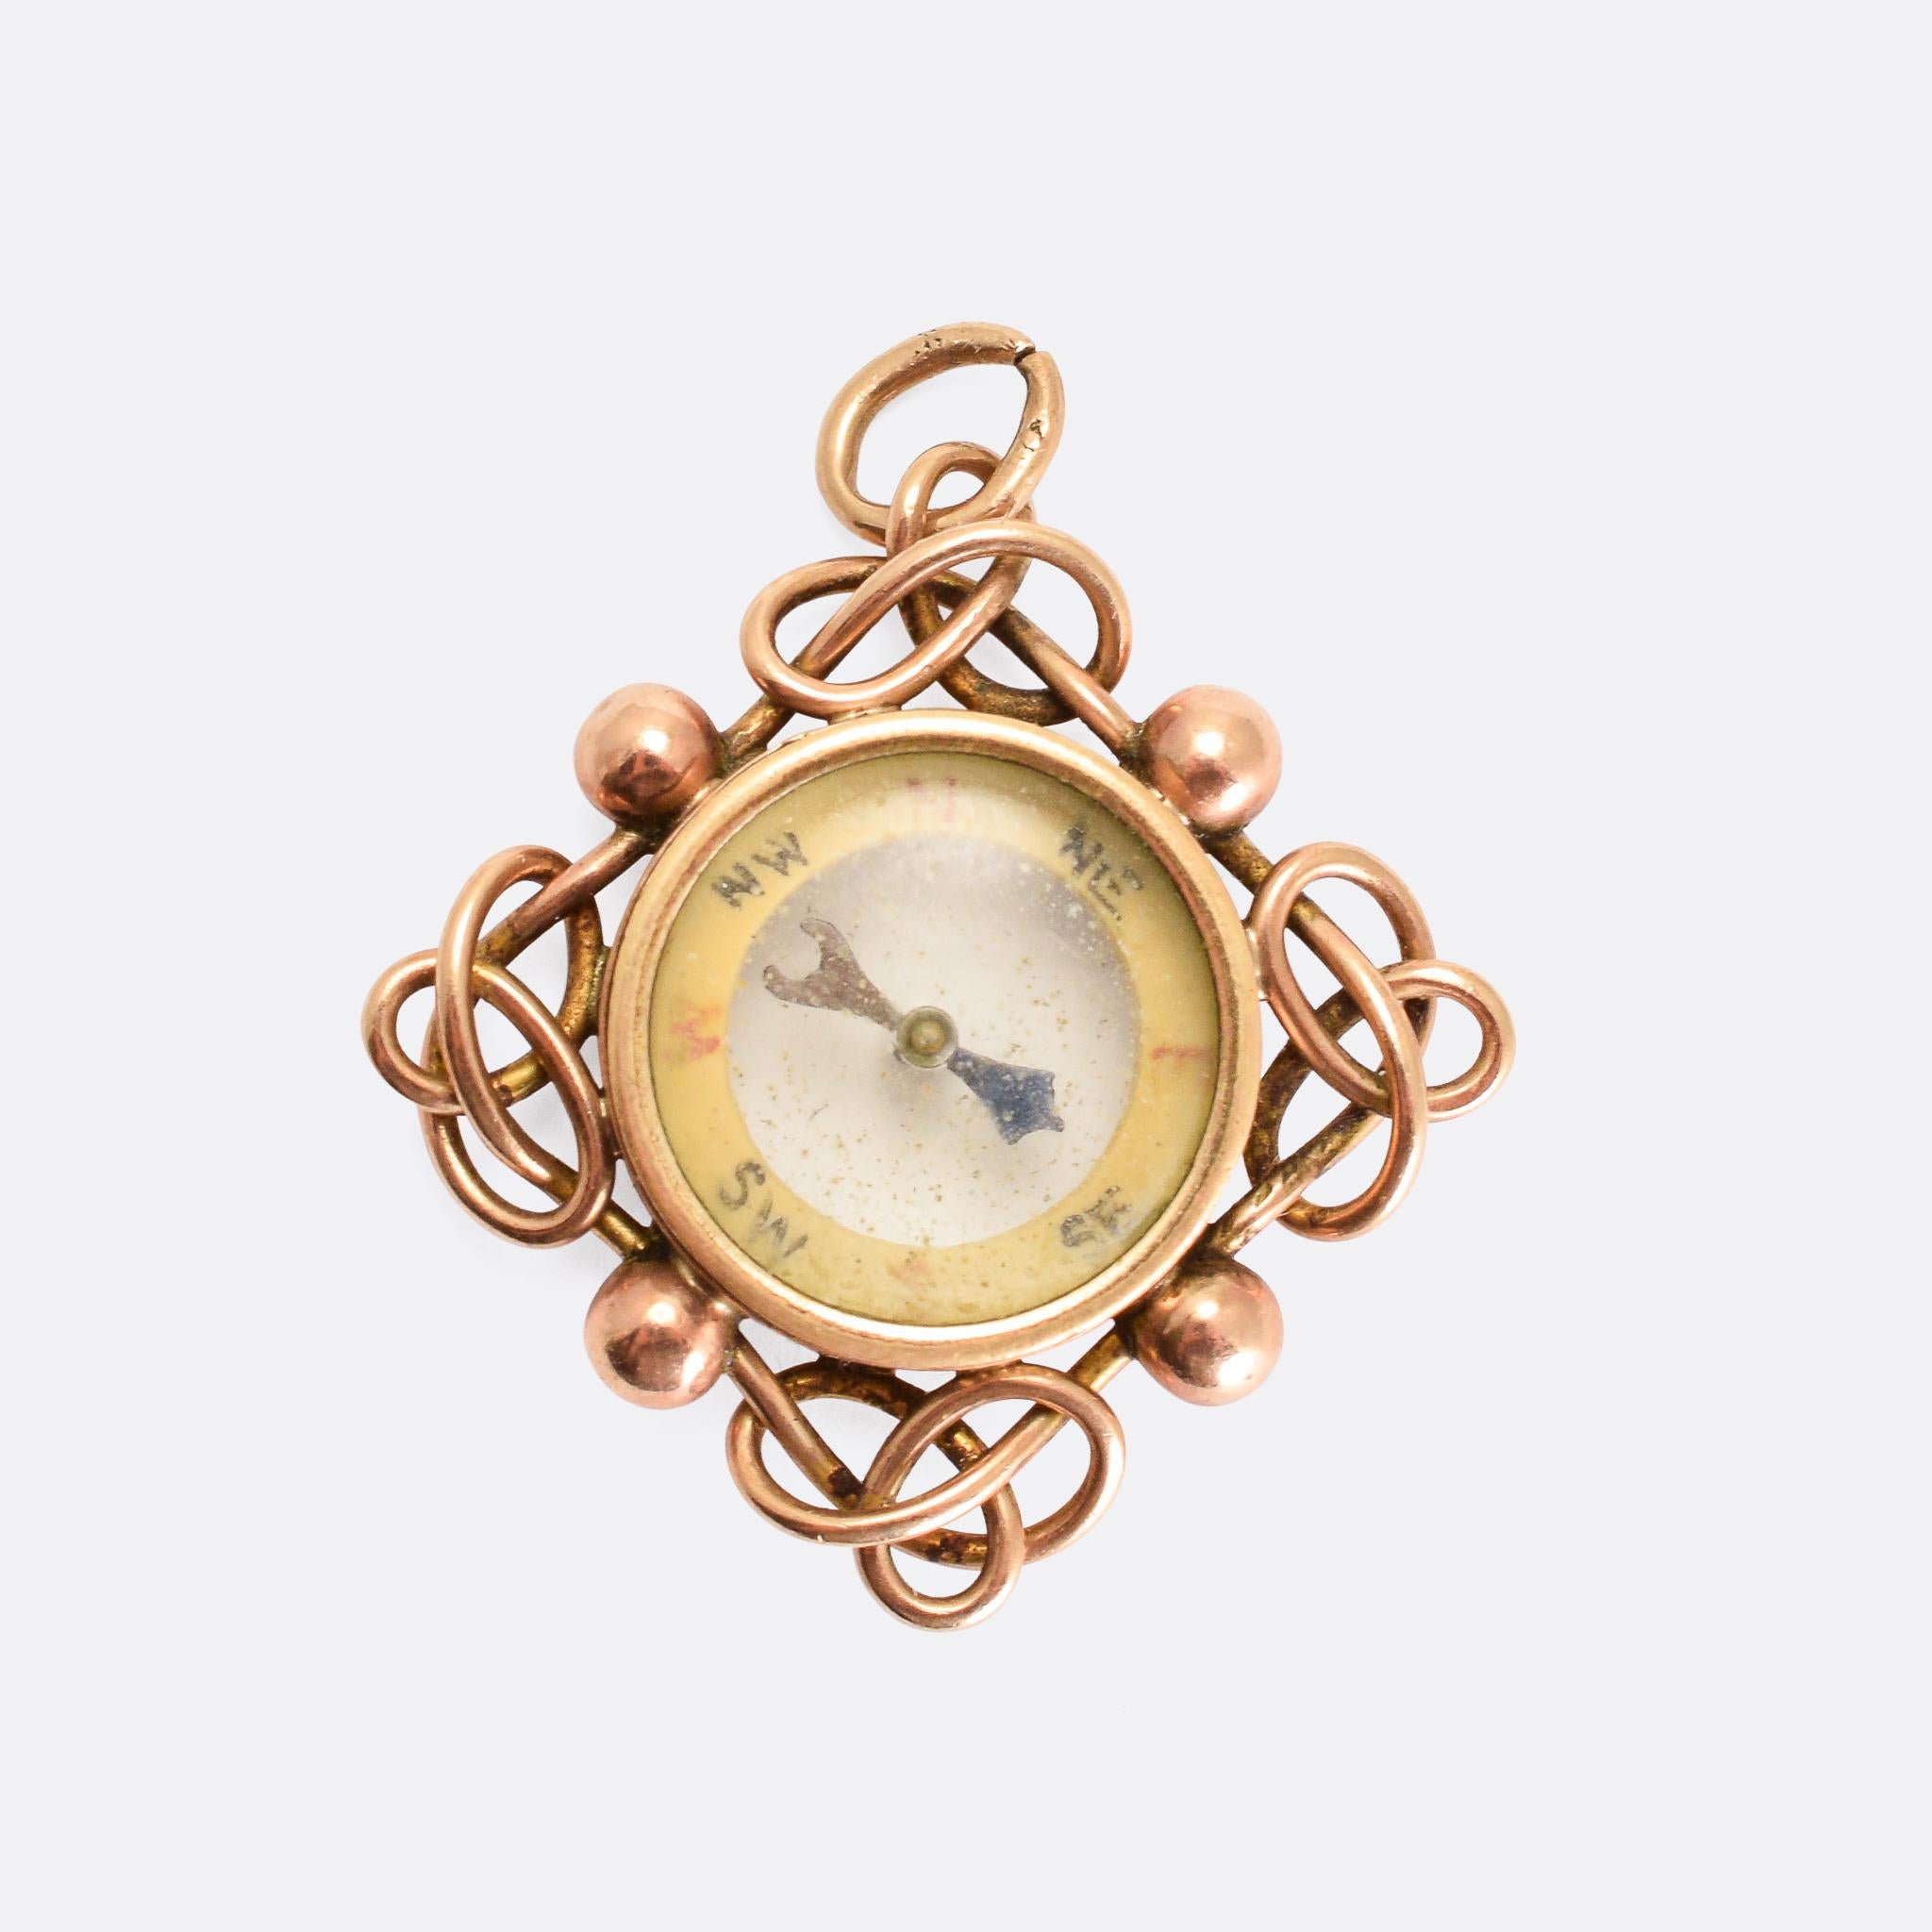 A fine vintage working compass pendant crafted in 9k rose gold. It's a larger scale example, with an infinity knot and pommel border. If you've lost your way, this is sure to help.

MEASUREMENTS 
3.1 x 3.0cm

WEIGHT 
6.8g

MARKS 
English hallmarks